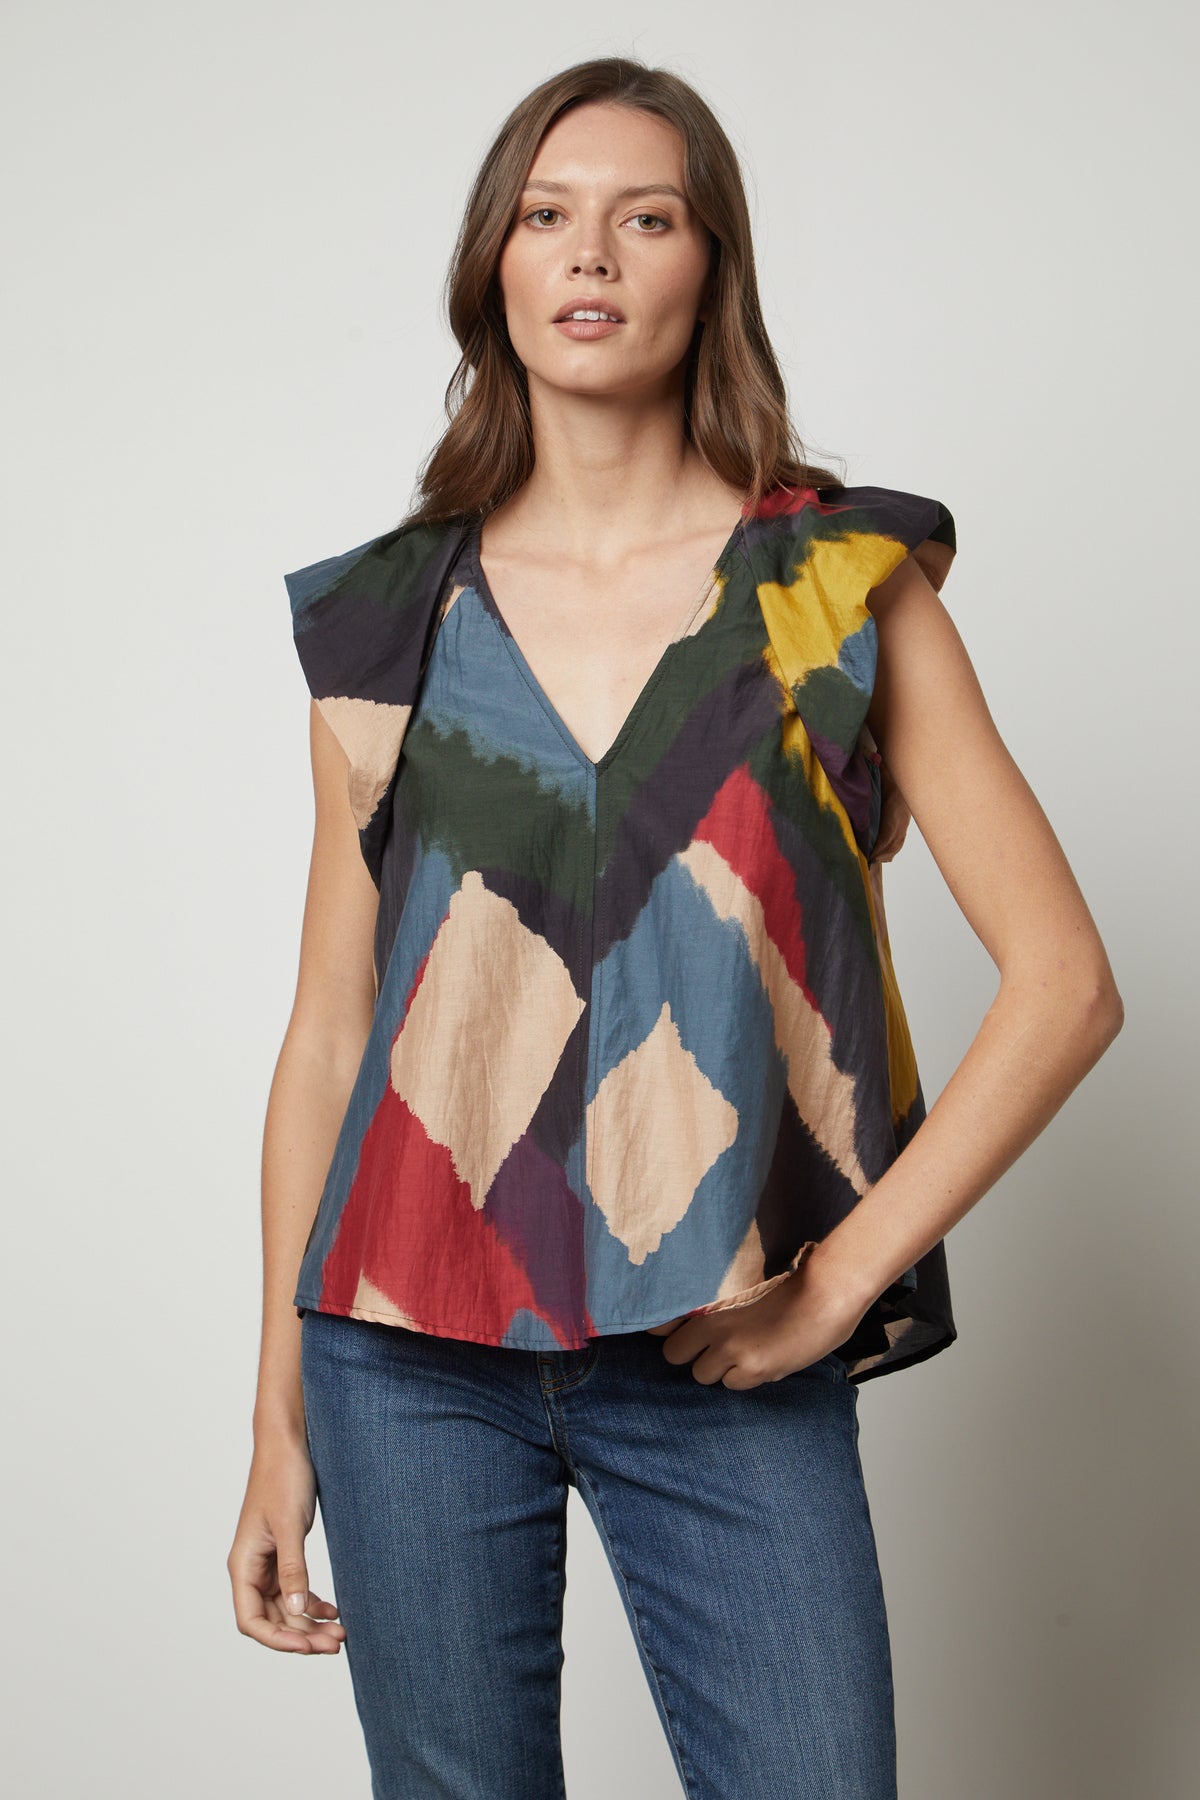 A woman wearing TAMARA PRINTED TOP from Velvet by Graham & Spencer jeans and a colorful voile top with flutter sleeves.-35655953875137